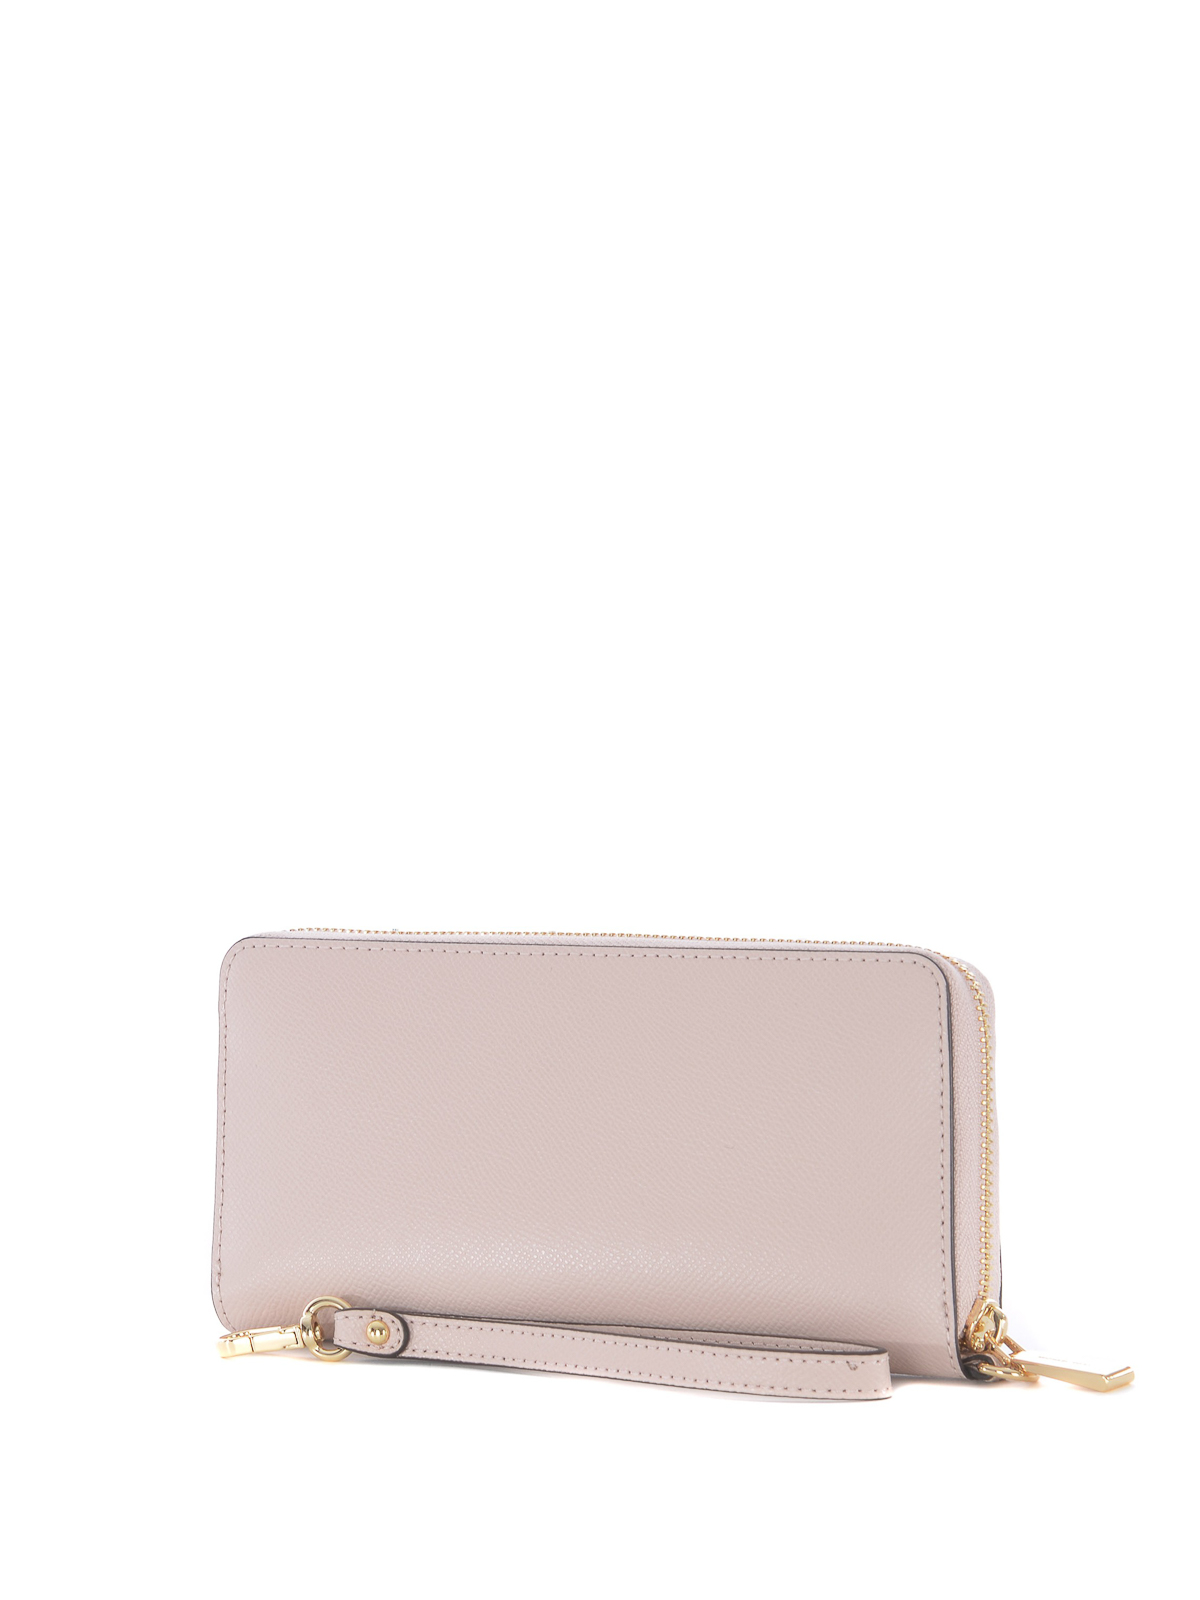 Light pink saffiano leather wallet 